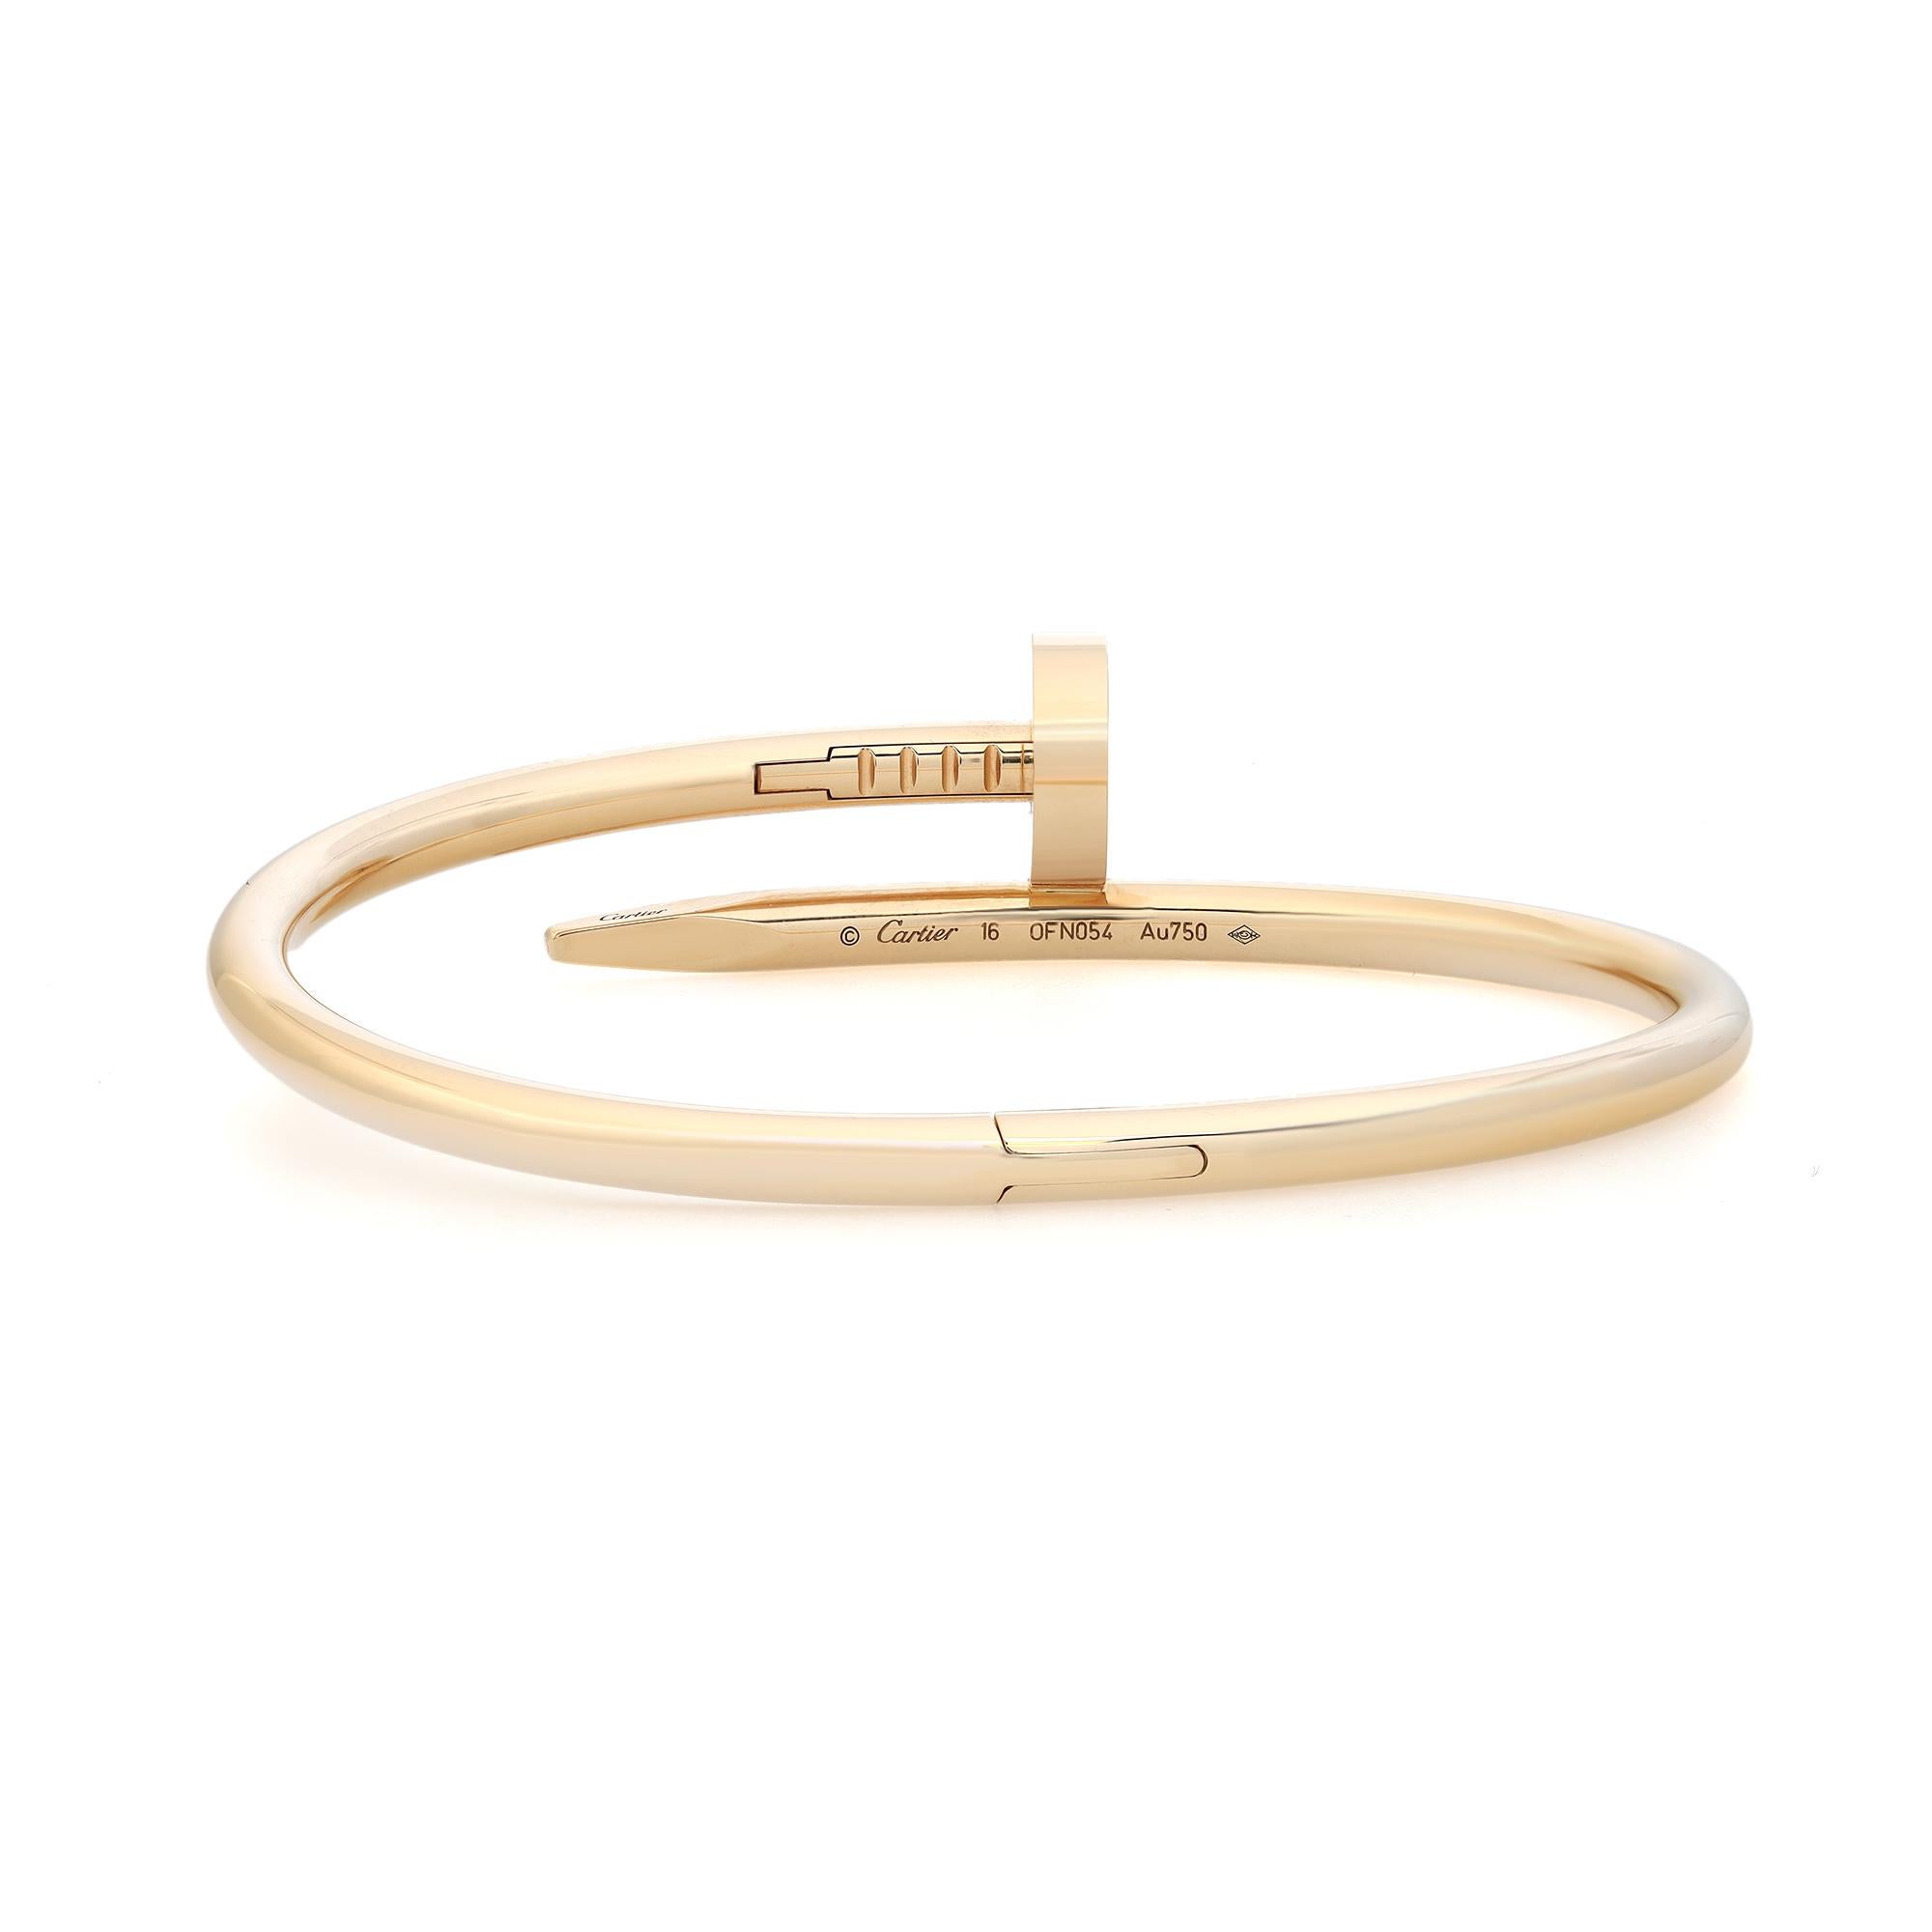 Cartier Juste un Clou bracelet, medium model, crafted in 18K yellow gold. Size 16. Width 3.5 mm. Excellent preowned condition. The bracelet is marked 